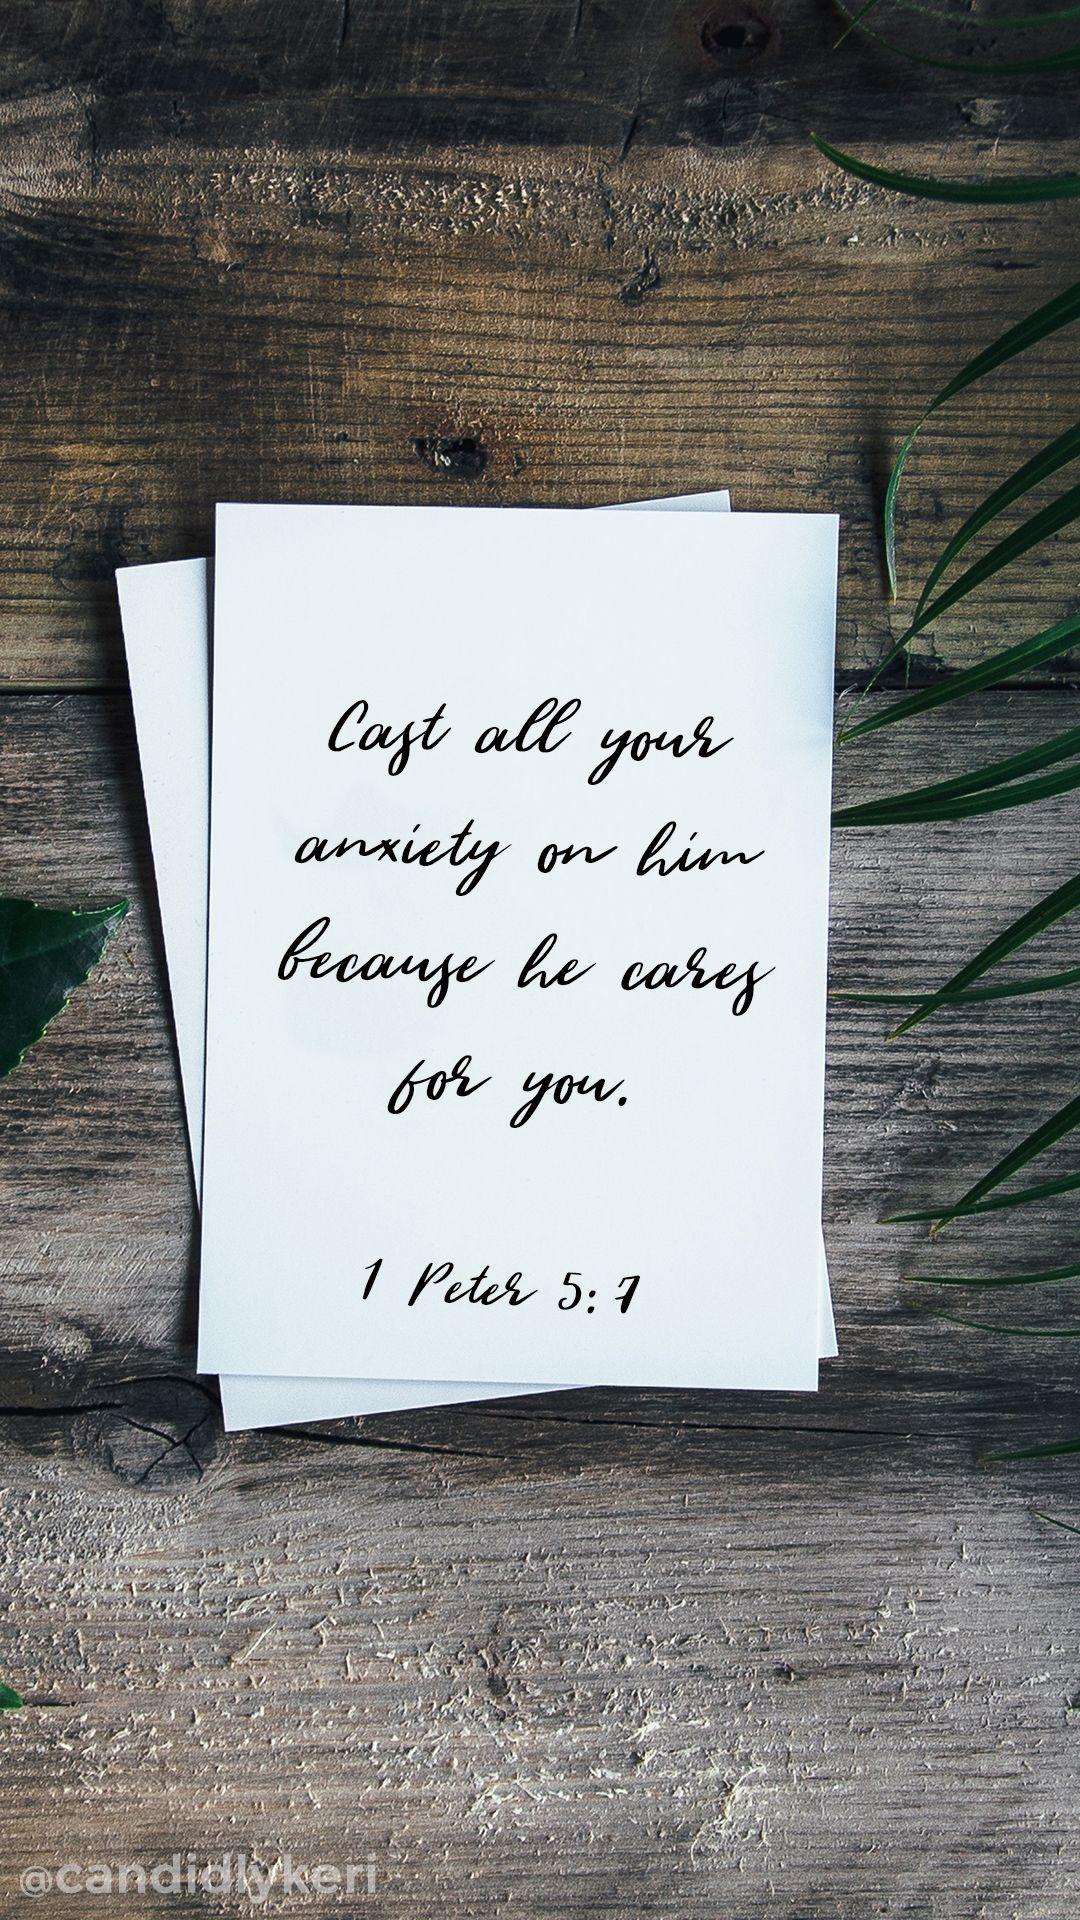 Cast all your anxiety on him because he cares for you 1 Peter 5:7